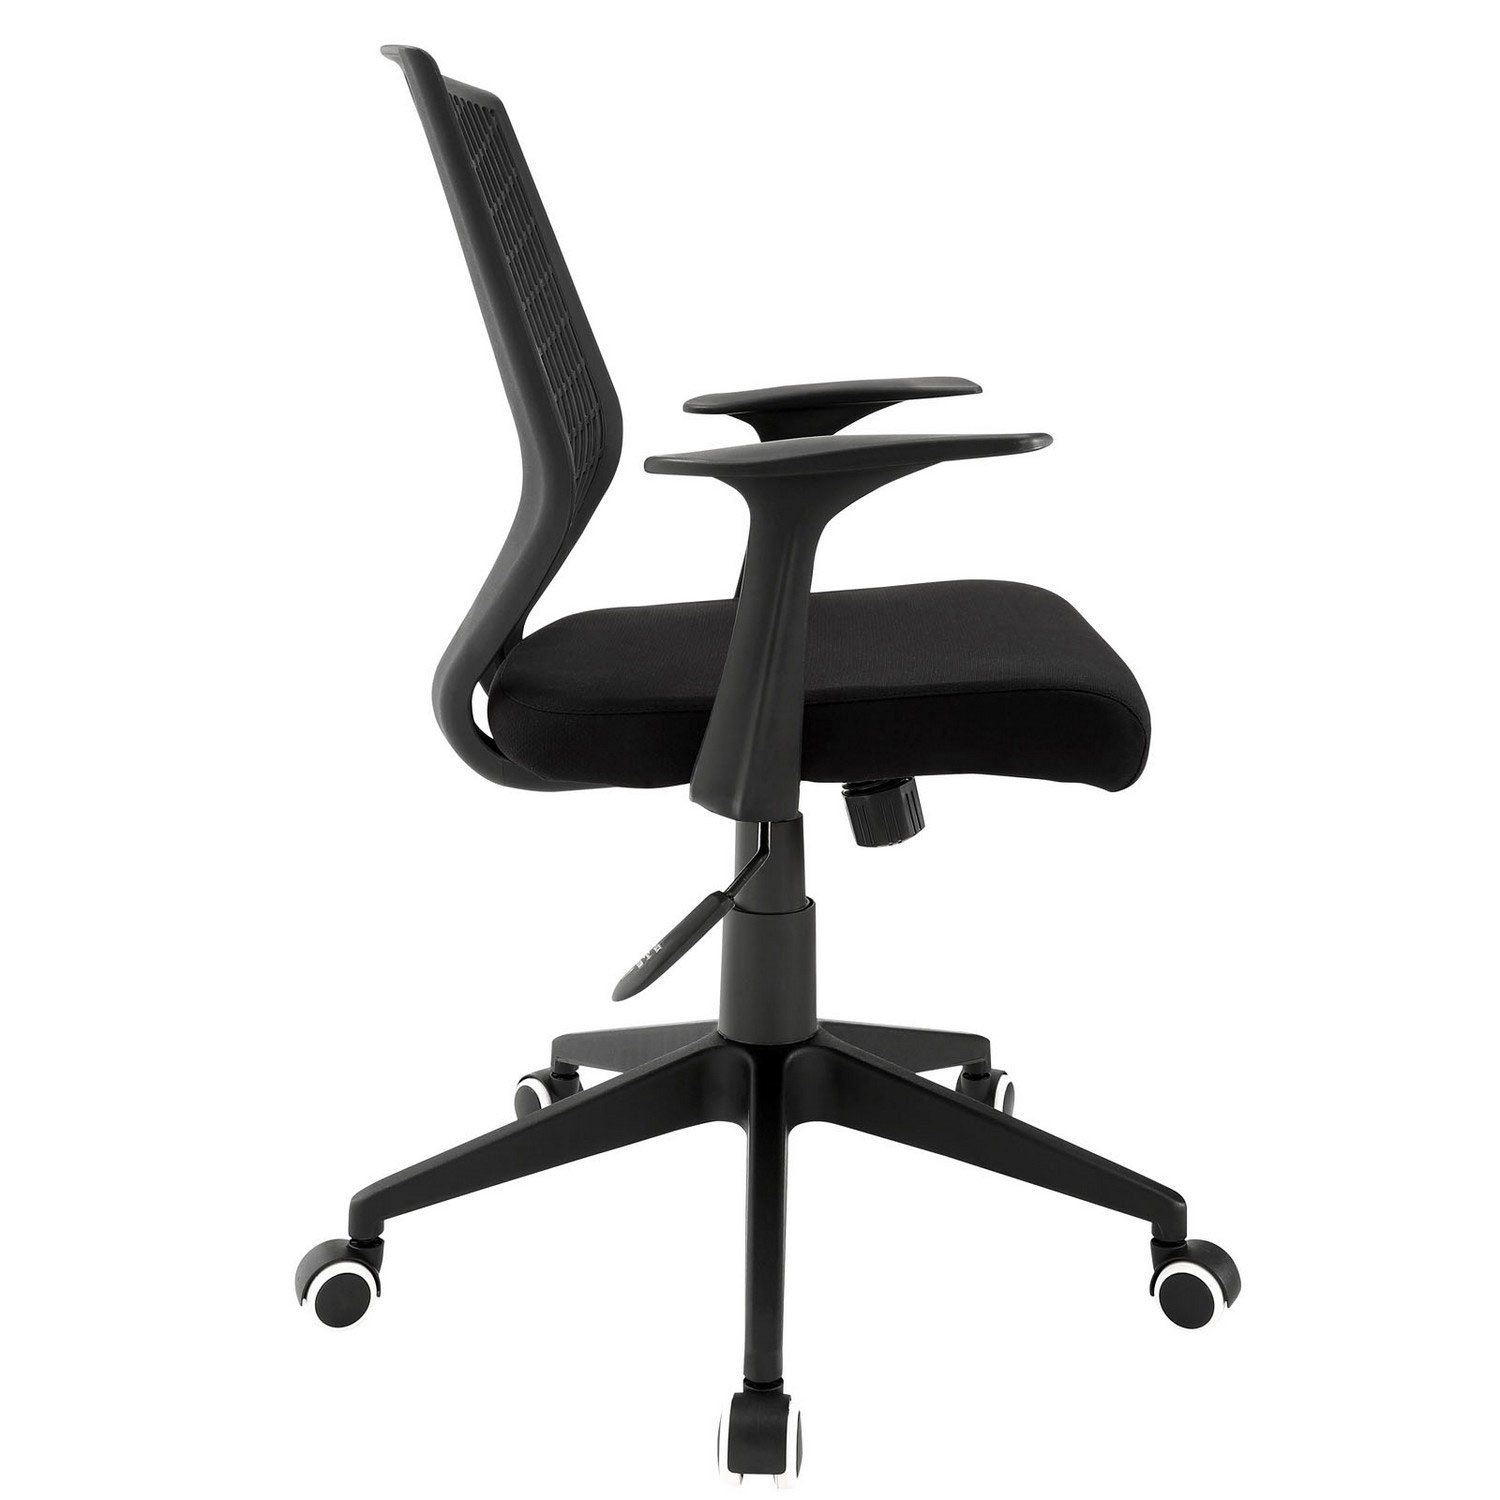 Modway Entrada Office Chair - Black